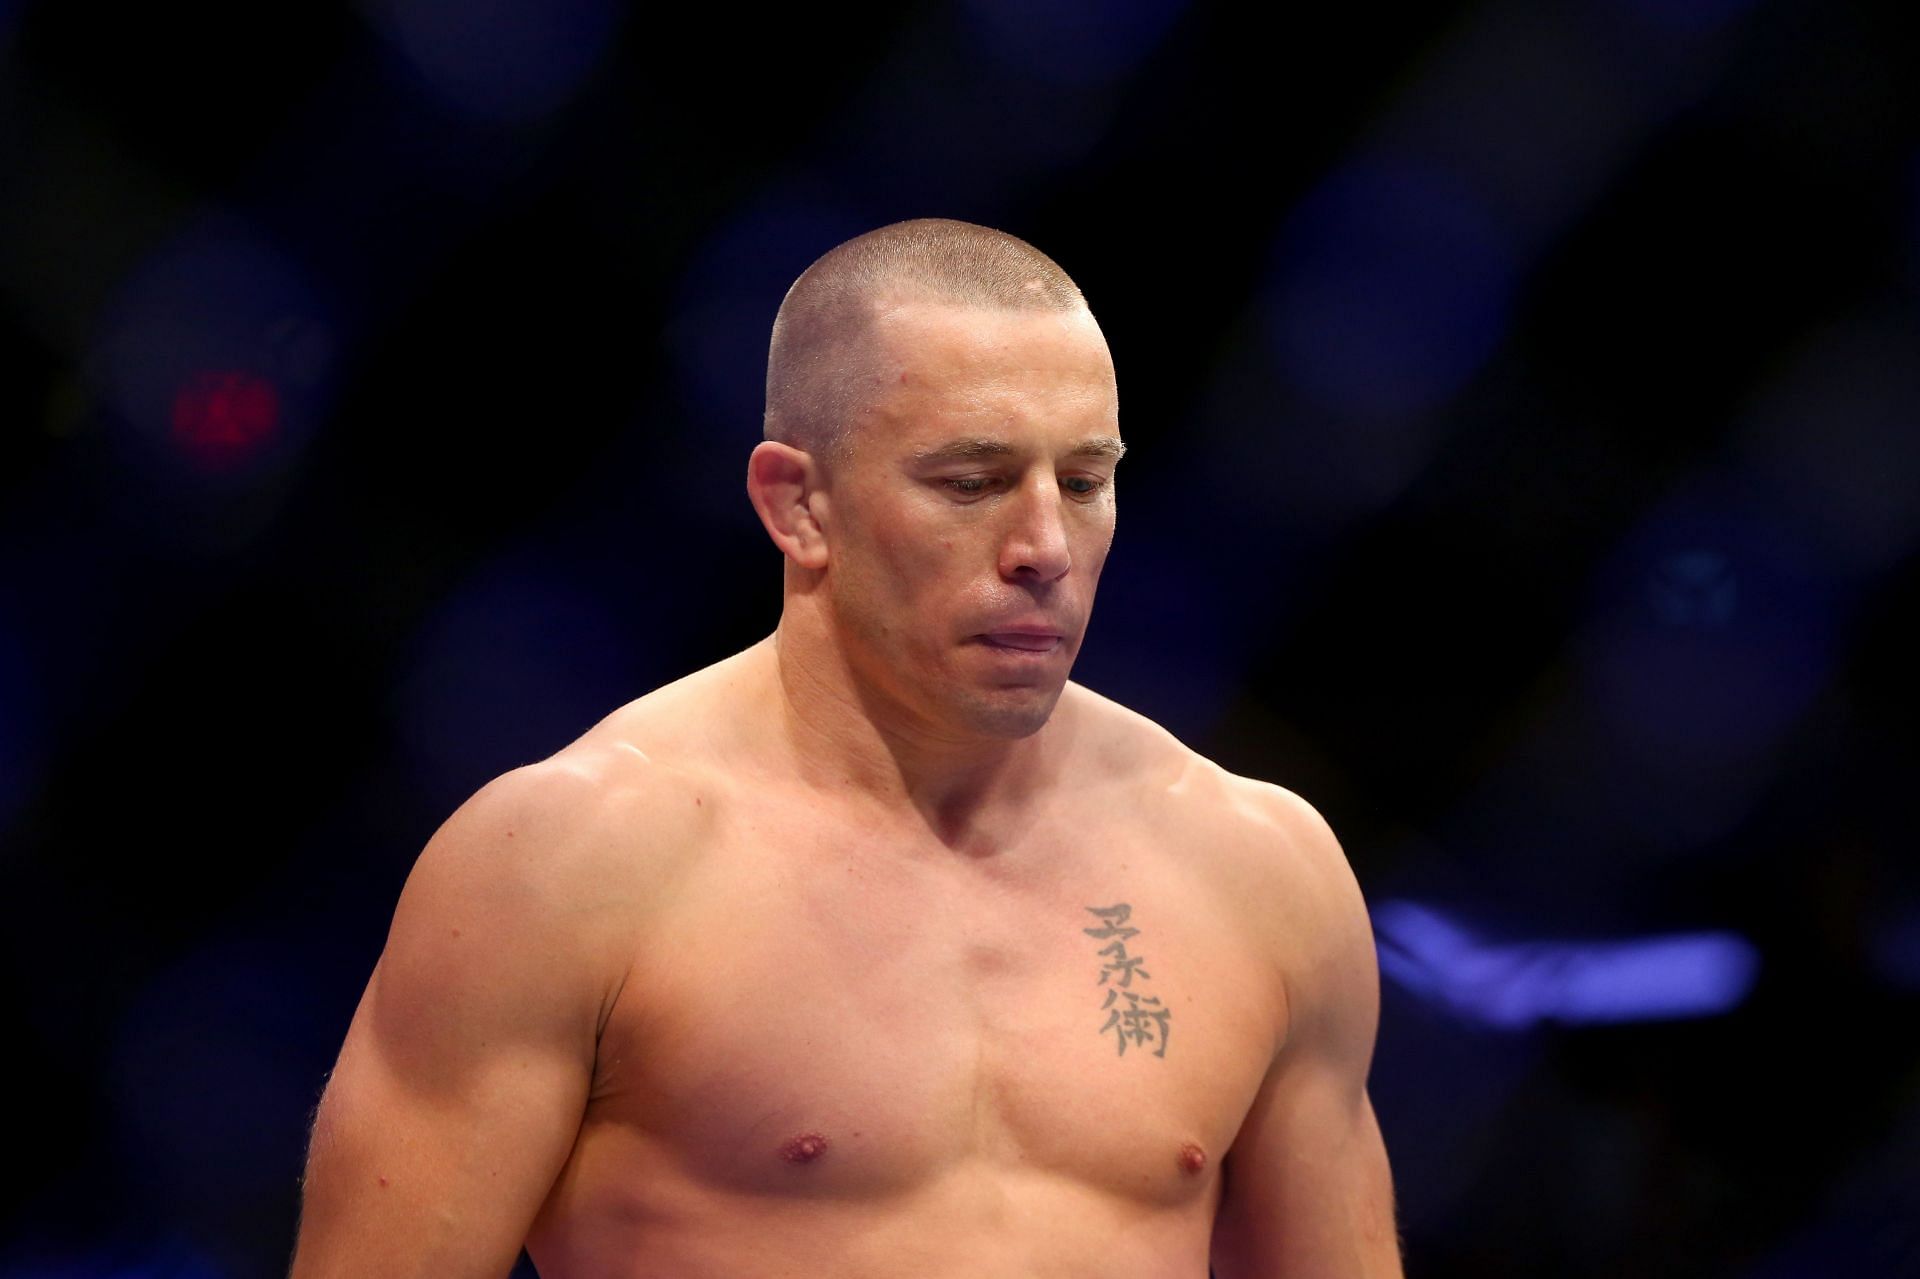 Georges St-Pierre was often criticised for his fighting style, particularly during his welterweight title reign